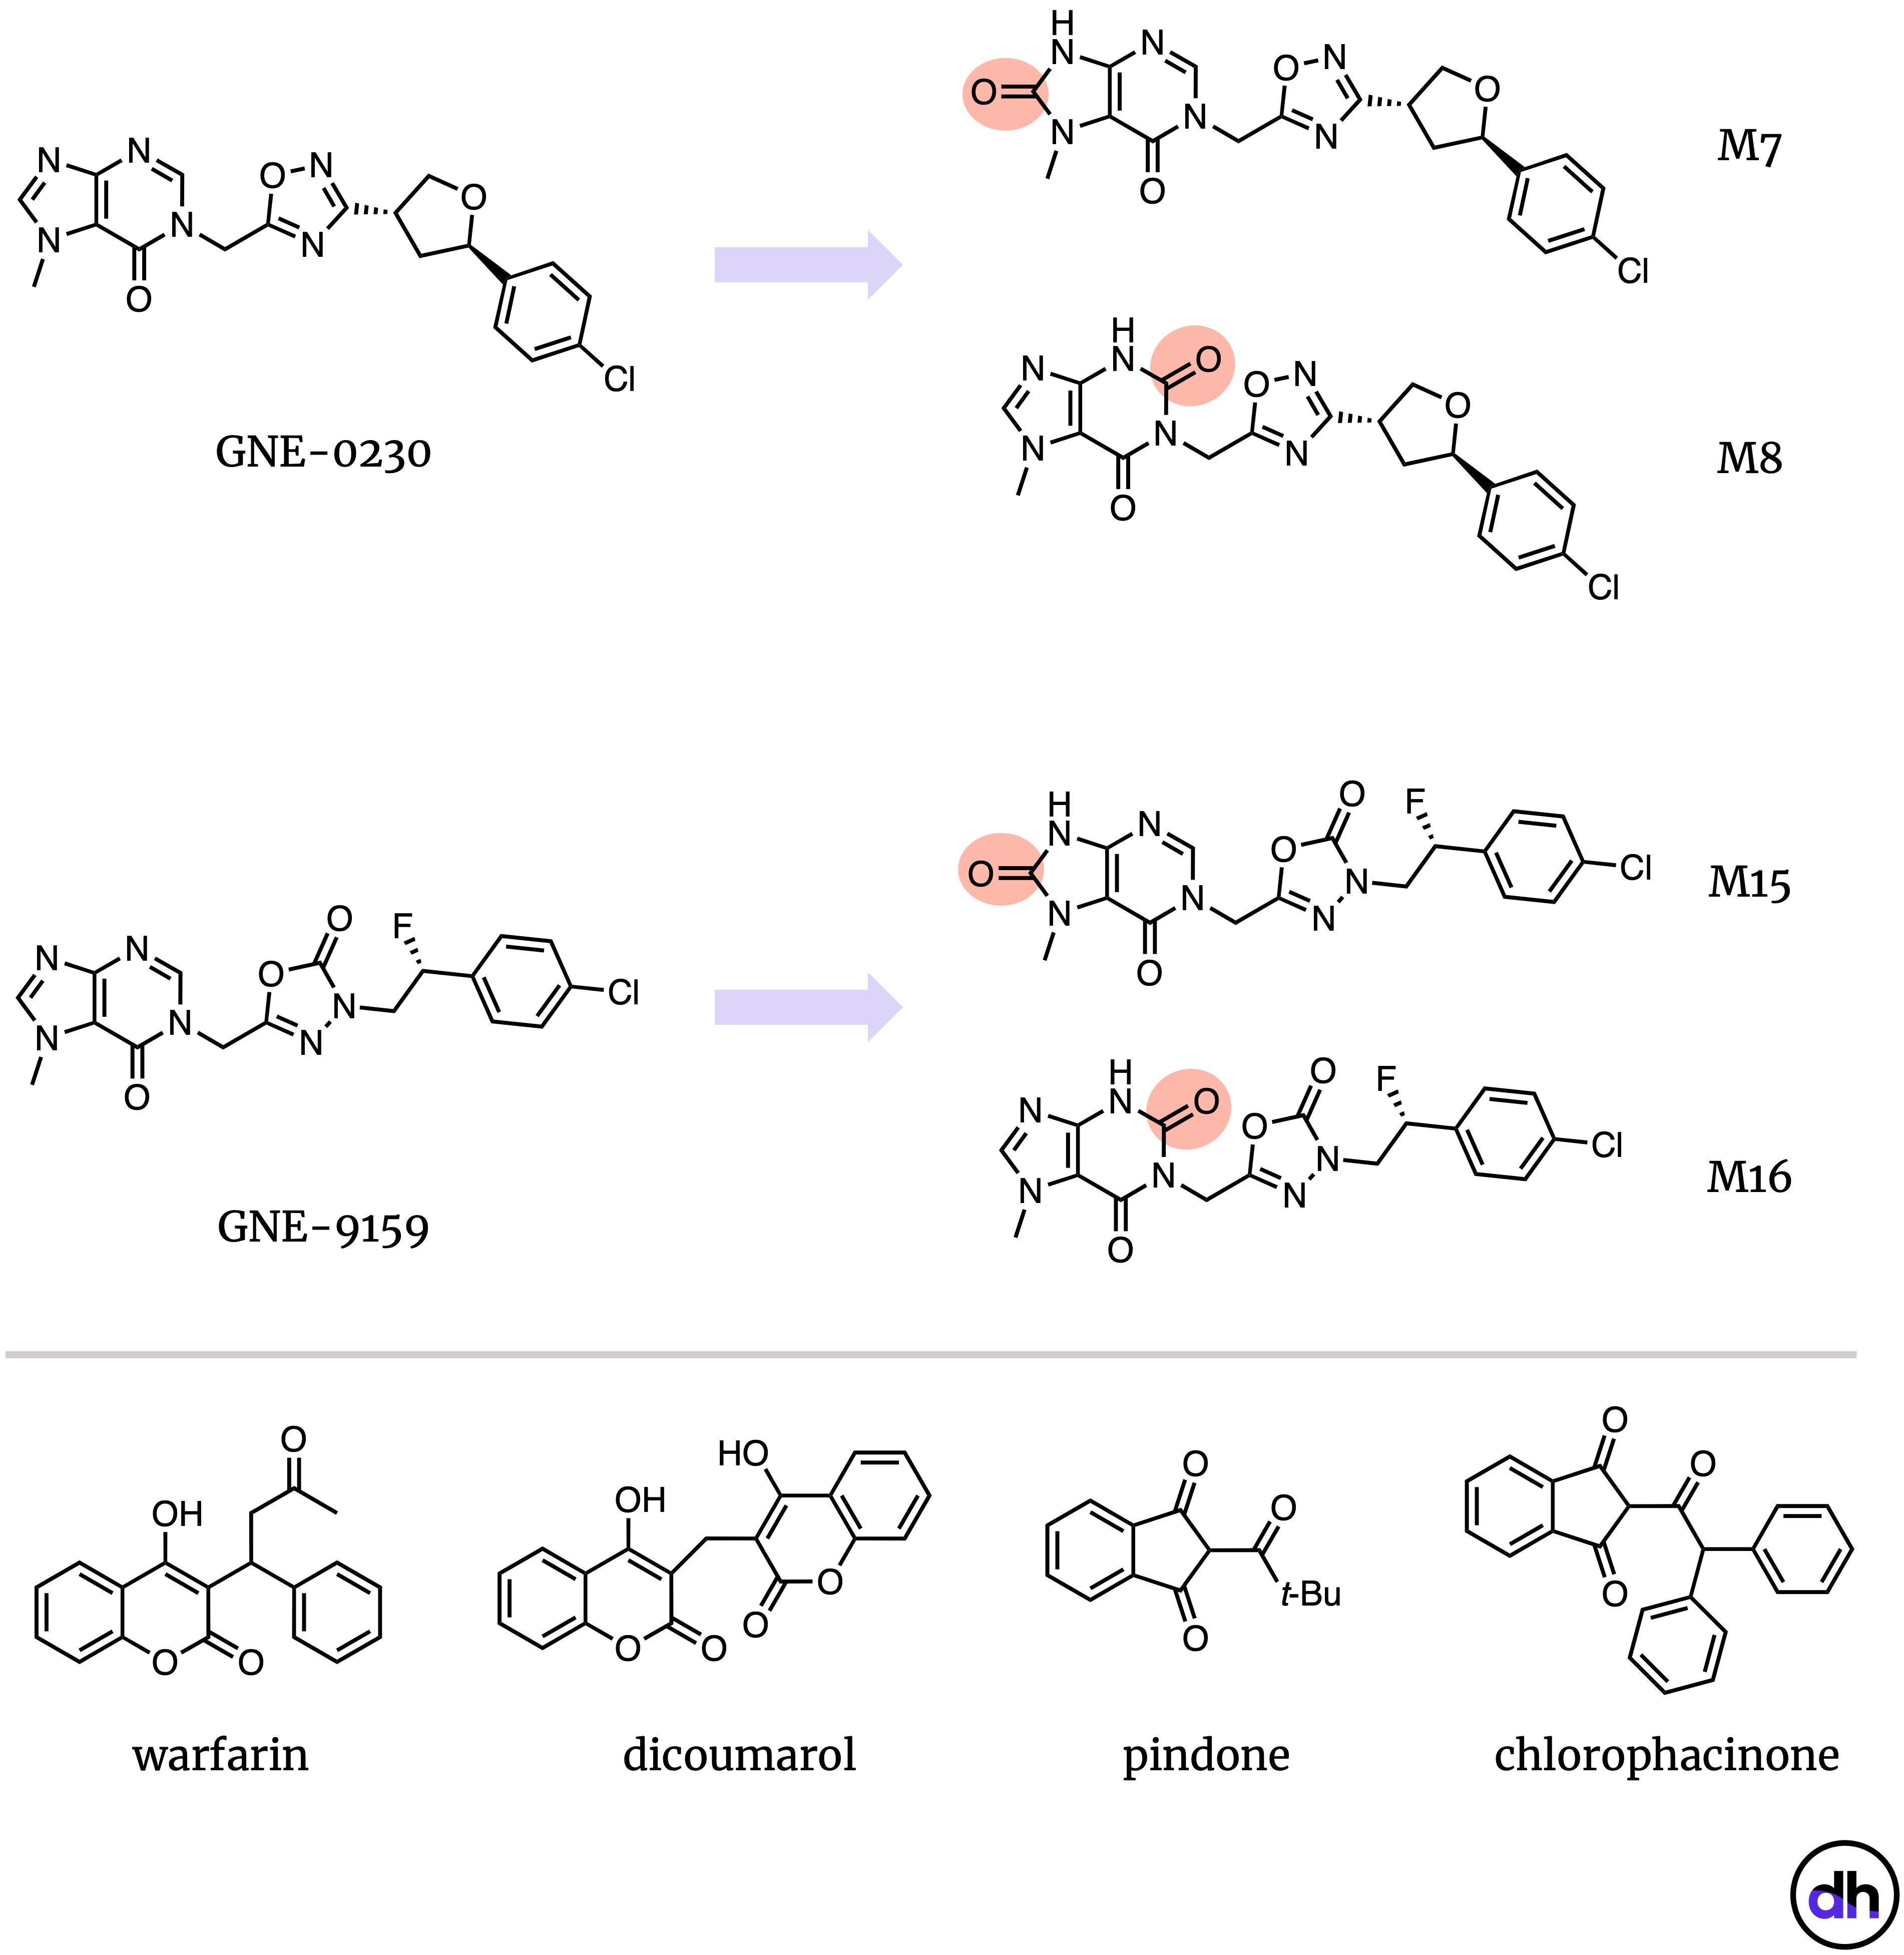 Figure 4. MetID studies for GNE-0230 and GNE-9159 revealed significant levels of metabolites arising from oxidation, which was suspected to be mediated by AO. Metabolites like M8 and M16 show a conspicious similarity to the tricarbonyl-containing warfarin class of anticoagulants.